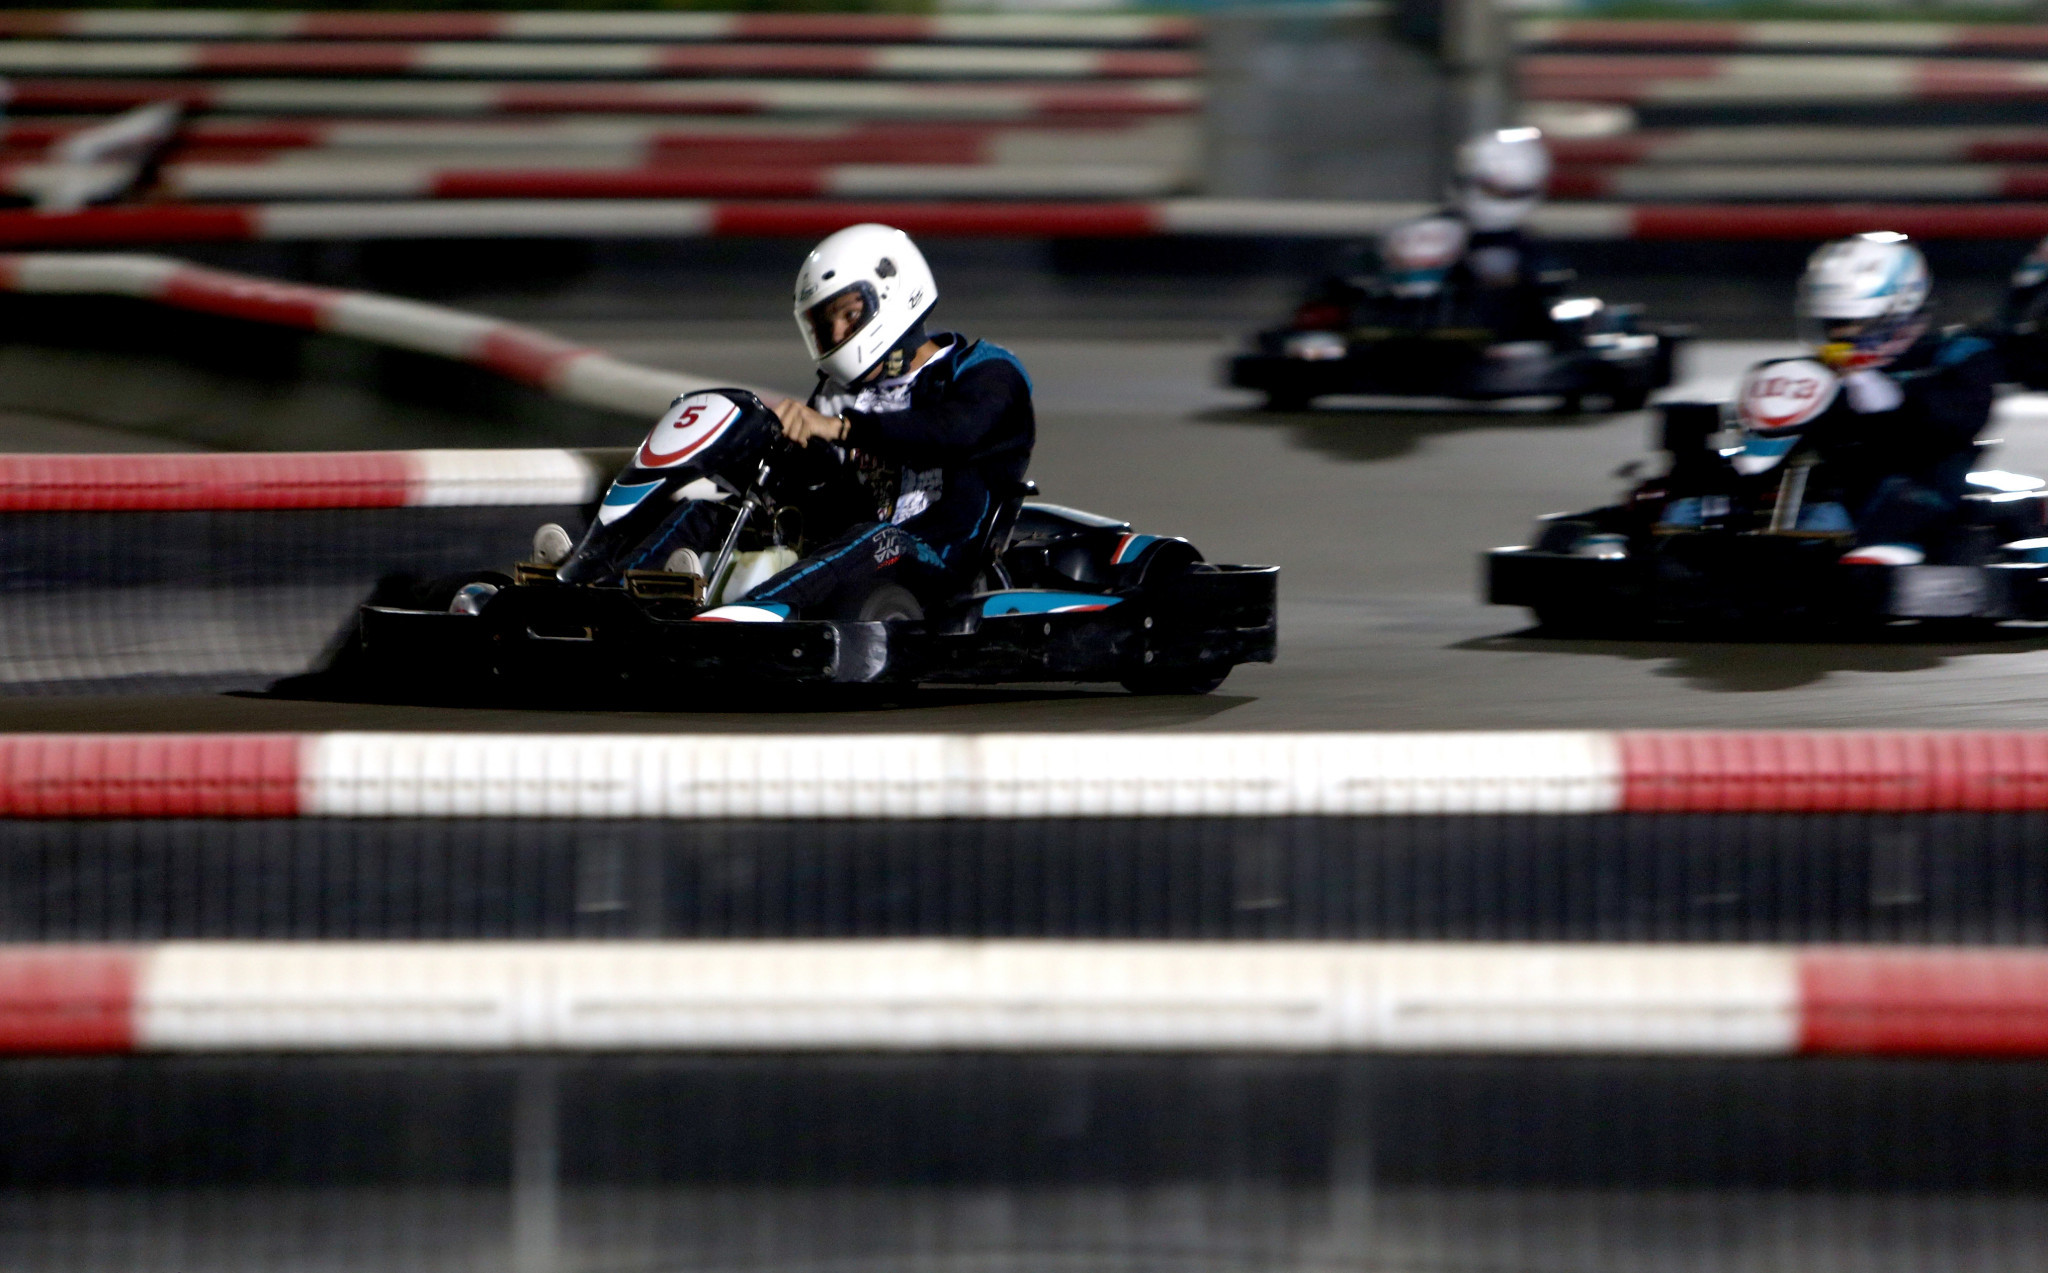 Several karting events are set to take place at the FIA Motorsport Games ©Getty Images